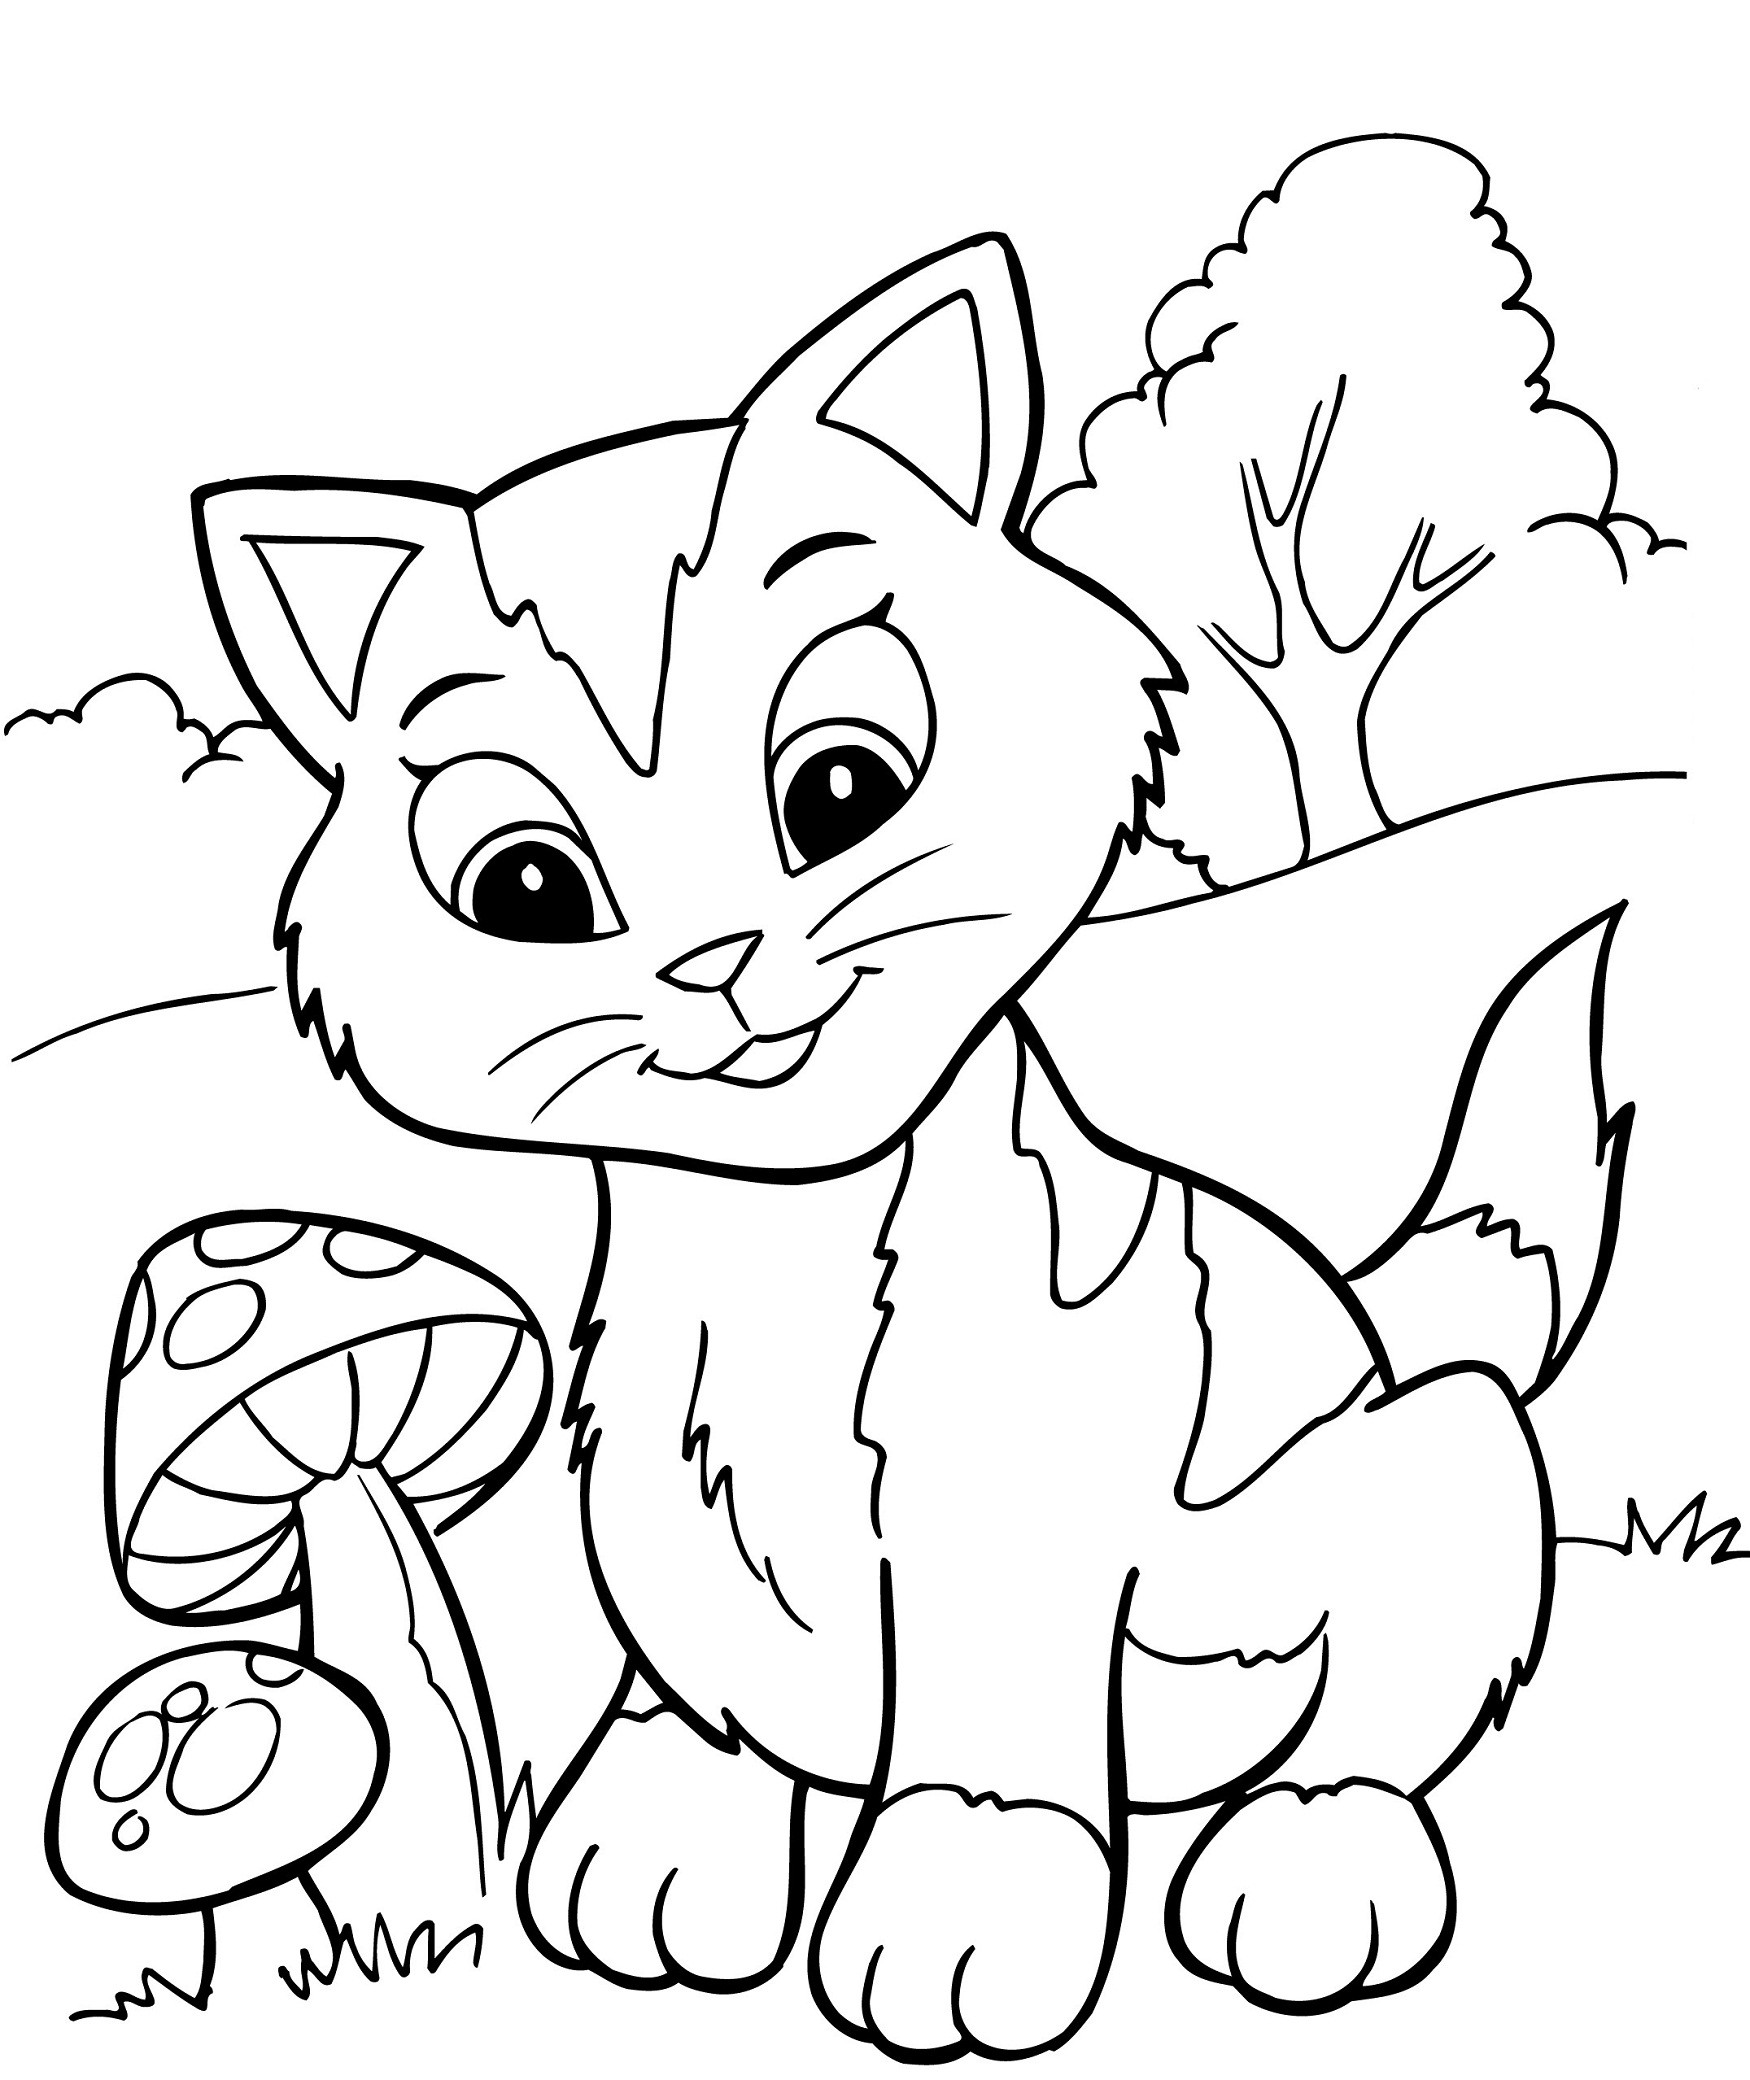 Toddler Coloring Pages Pdf
 Printable Coloring Book Pages for Kids Gallery